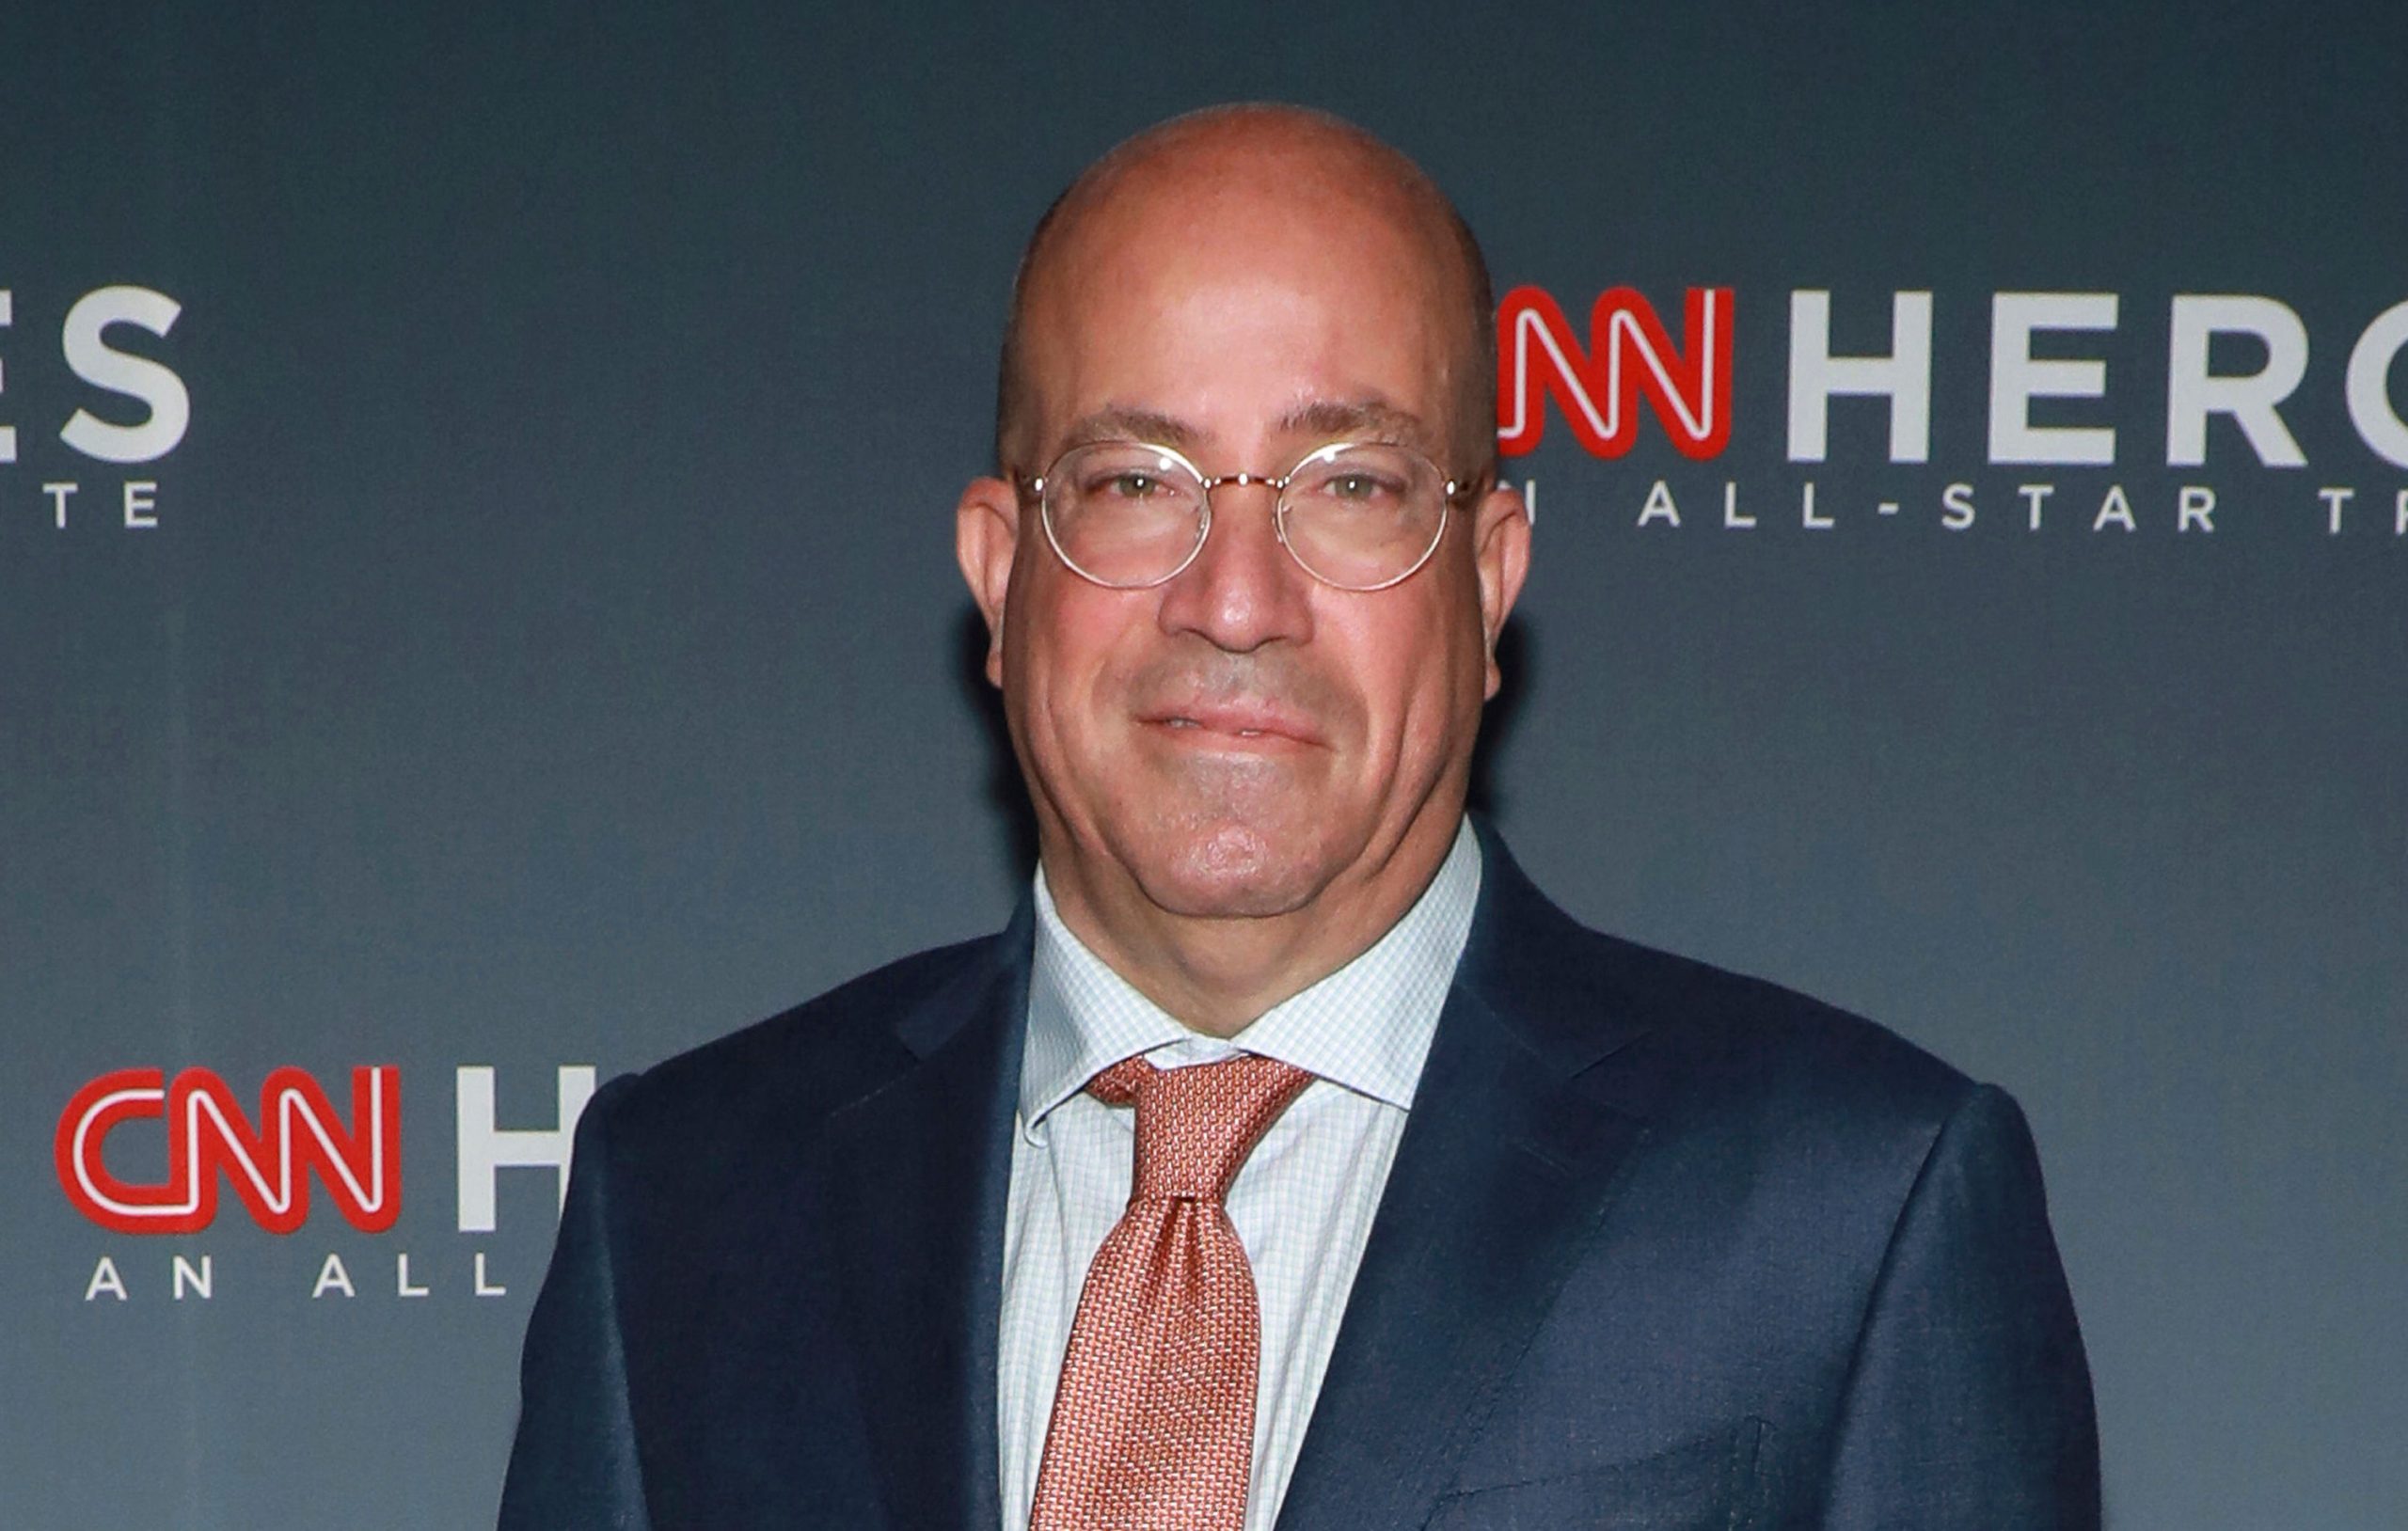 CNN president Jeff Zucker resigns, citing questions on past ‘consensual relationship’ with colleague